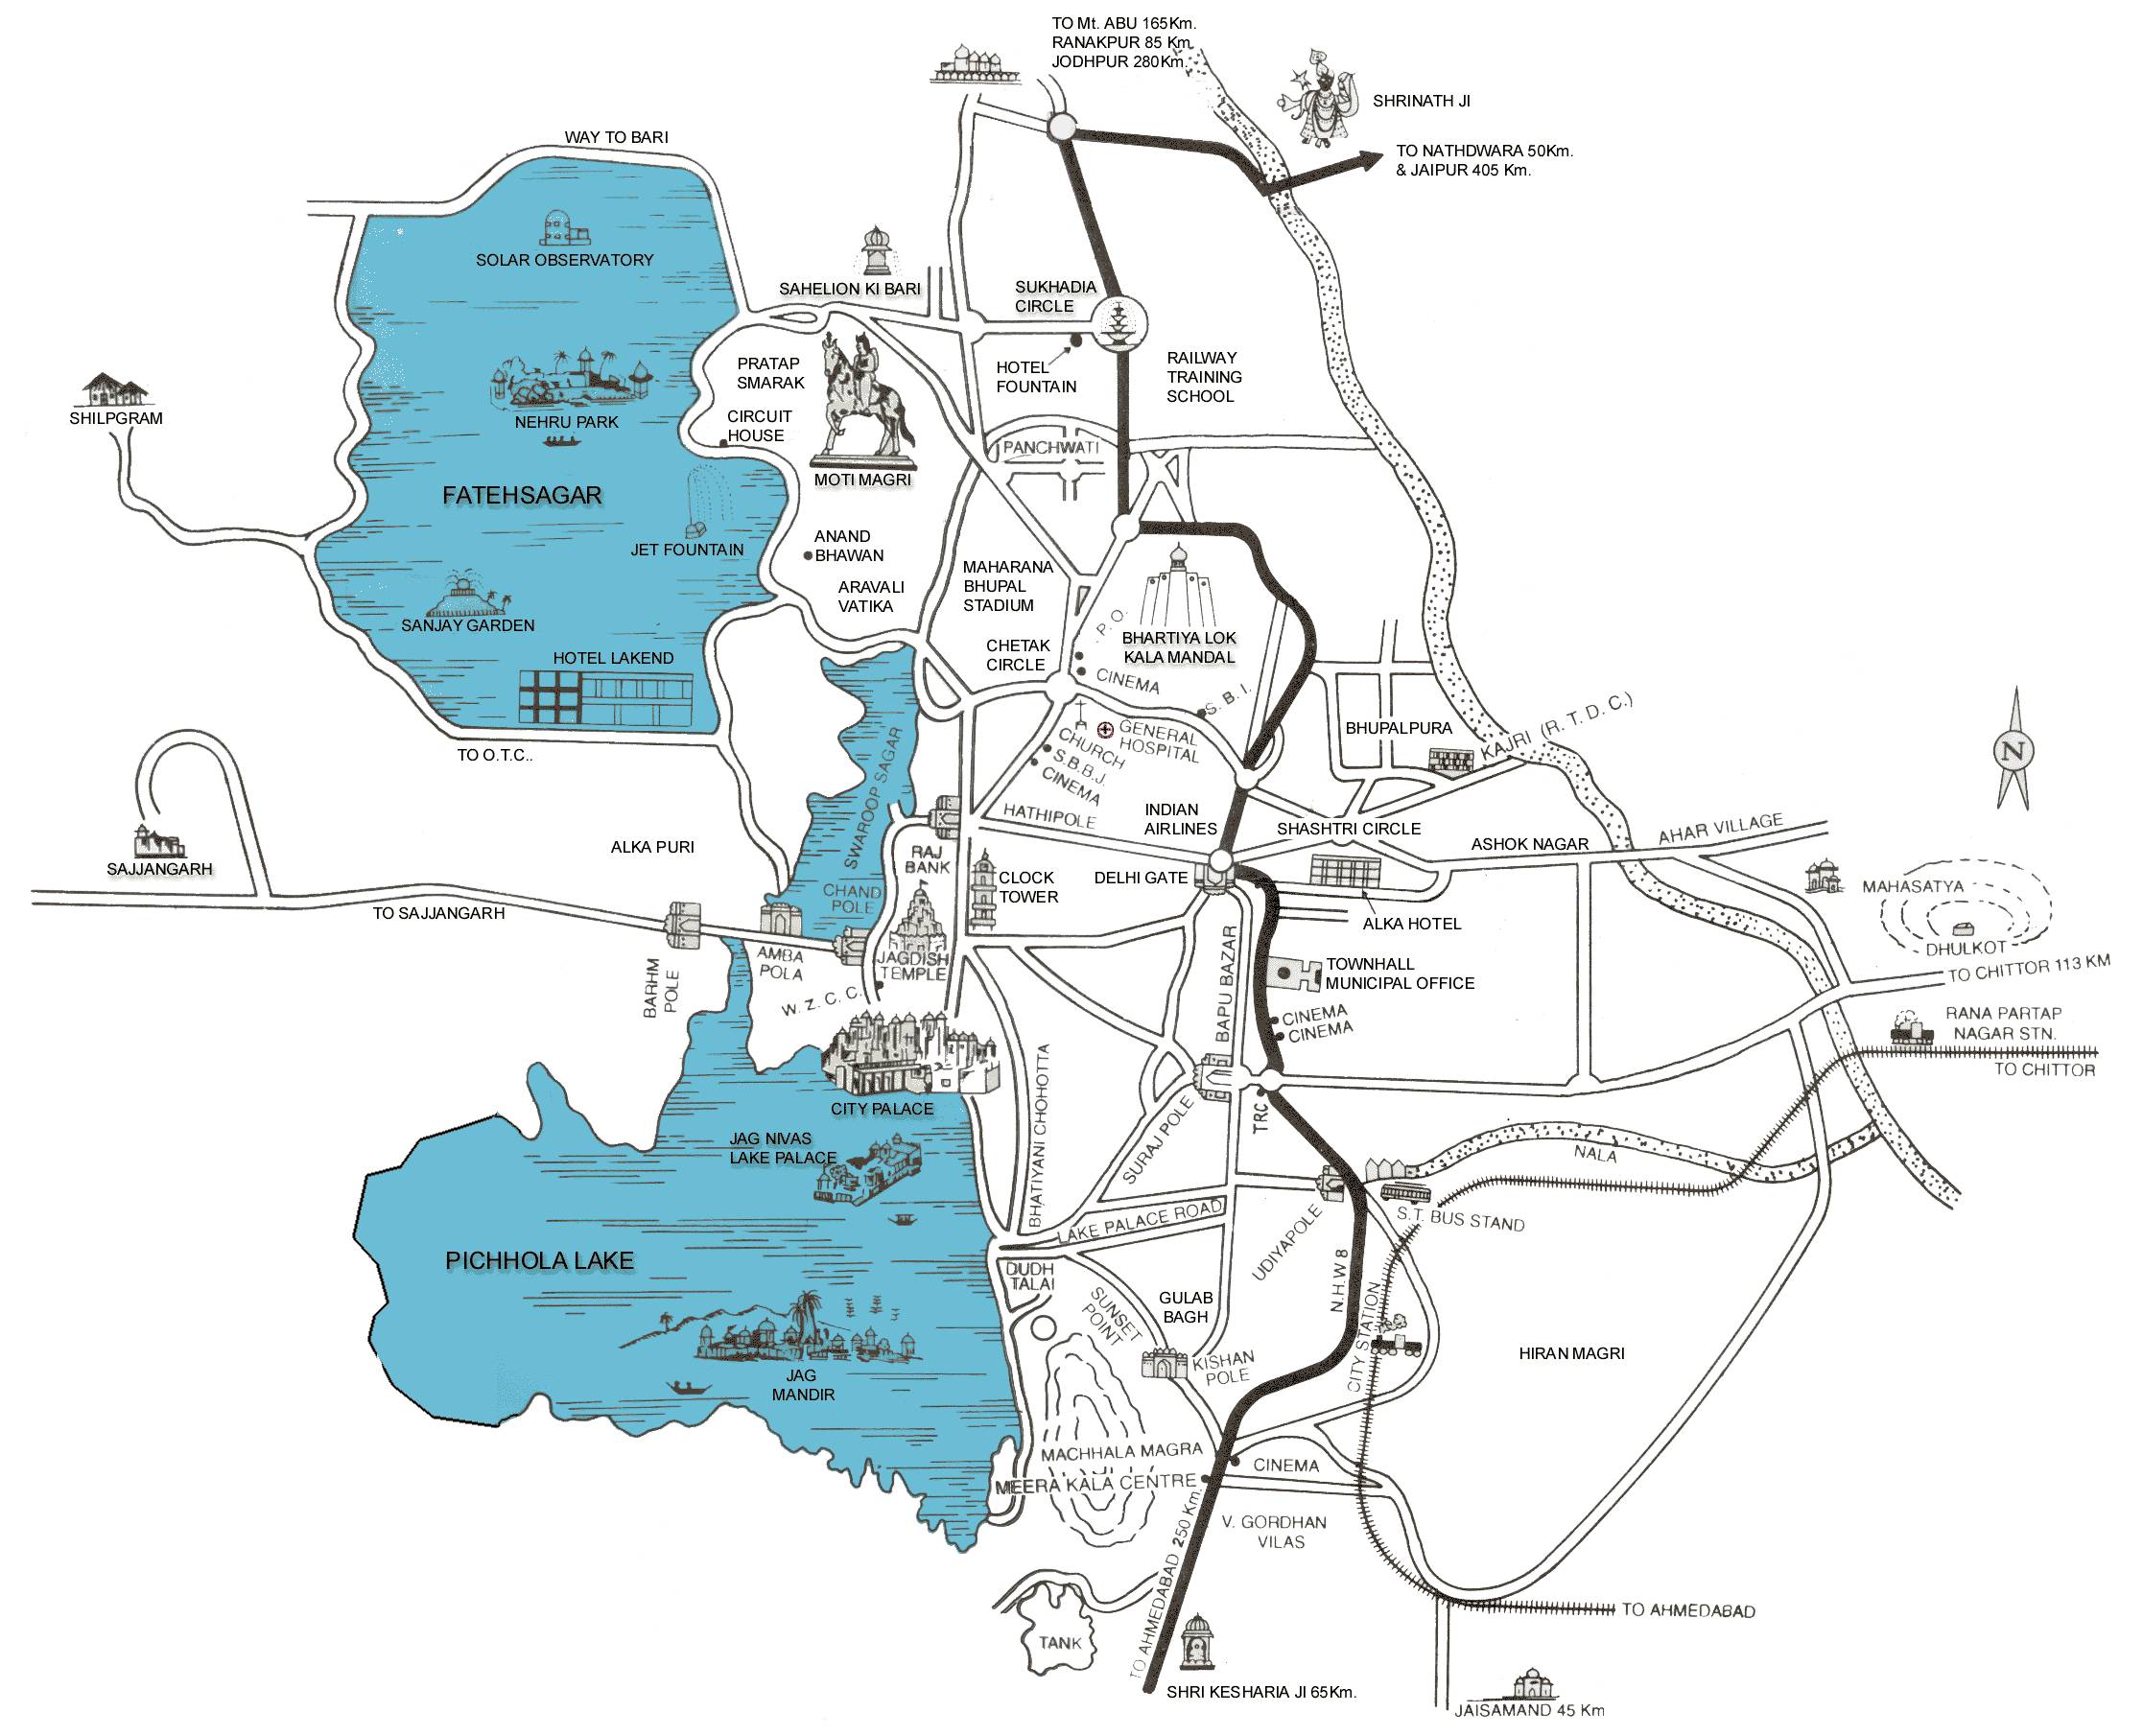 Udaipur city map : All major roads and tourist places located.